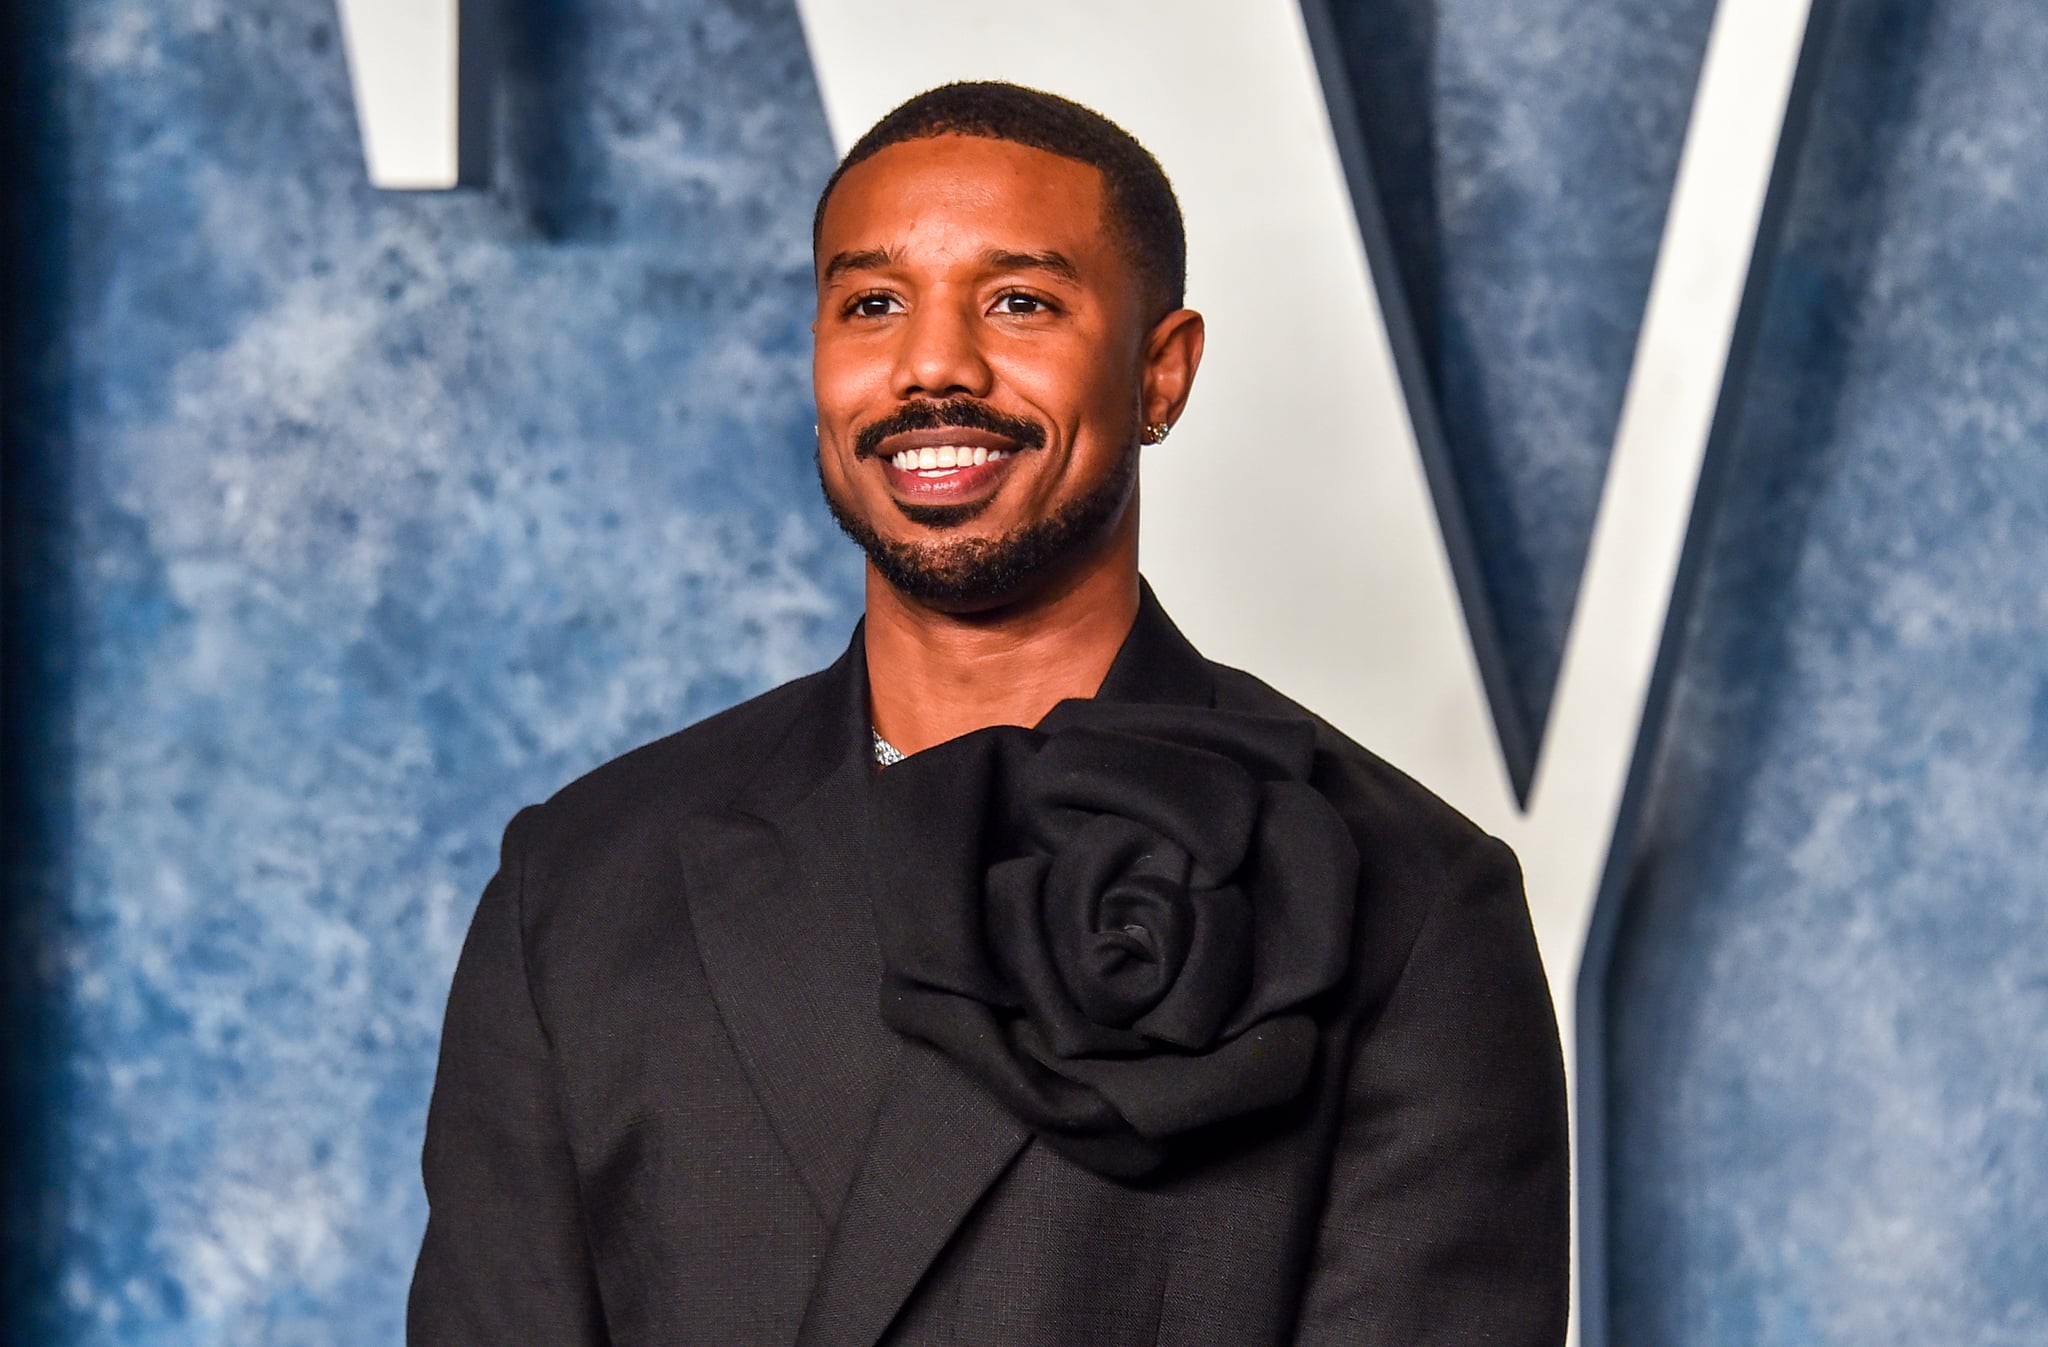 Michael B. Jordan at the 2023 Vanity Fair Oscar Party held at the Wallis Annenberg Center for the Performing Arts on March 12, 2023 in Beverly Hills, California. (Photo by Alberto Rodriguez/Variety via Getty Images)